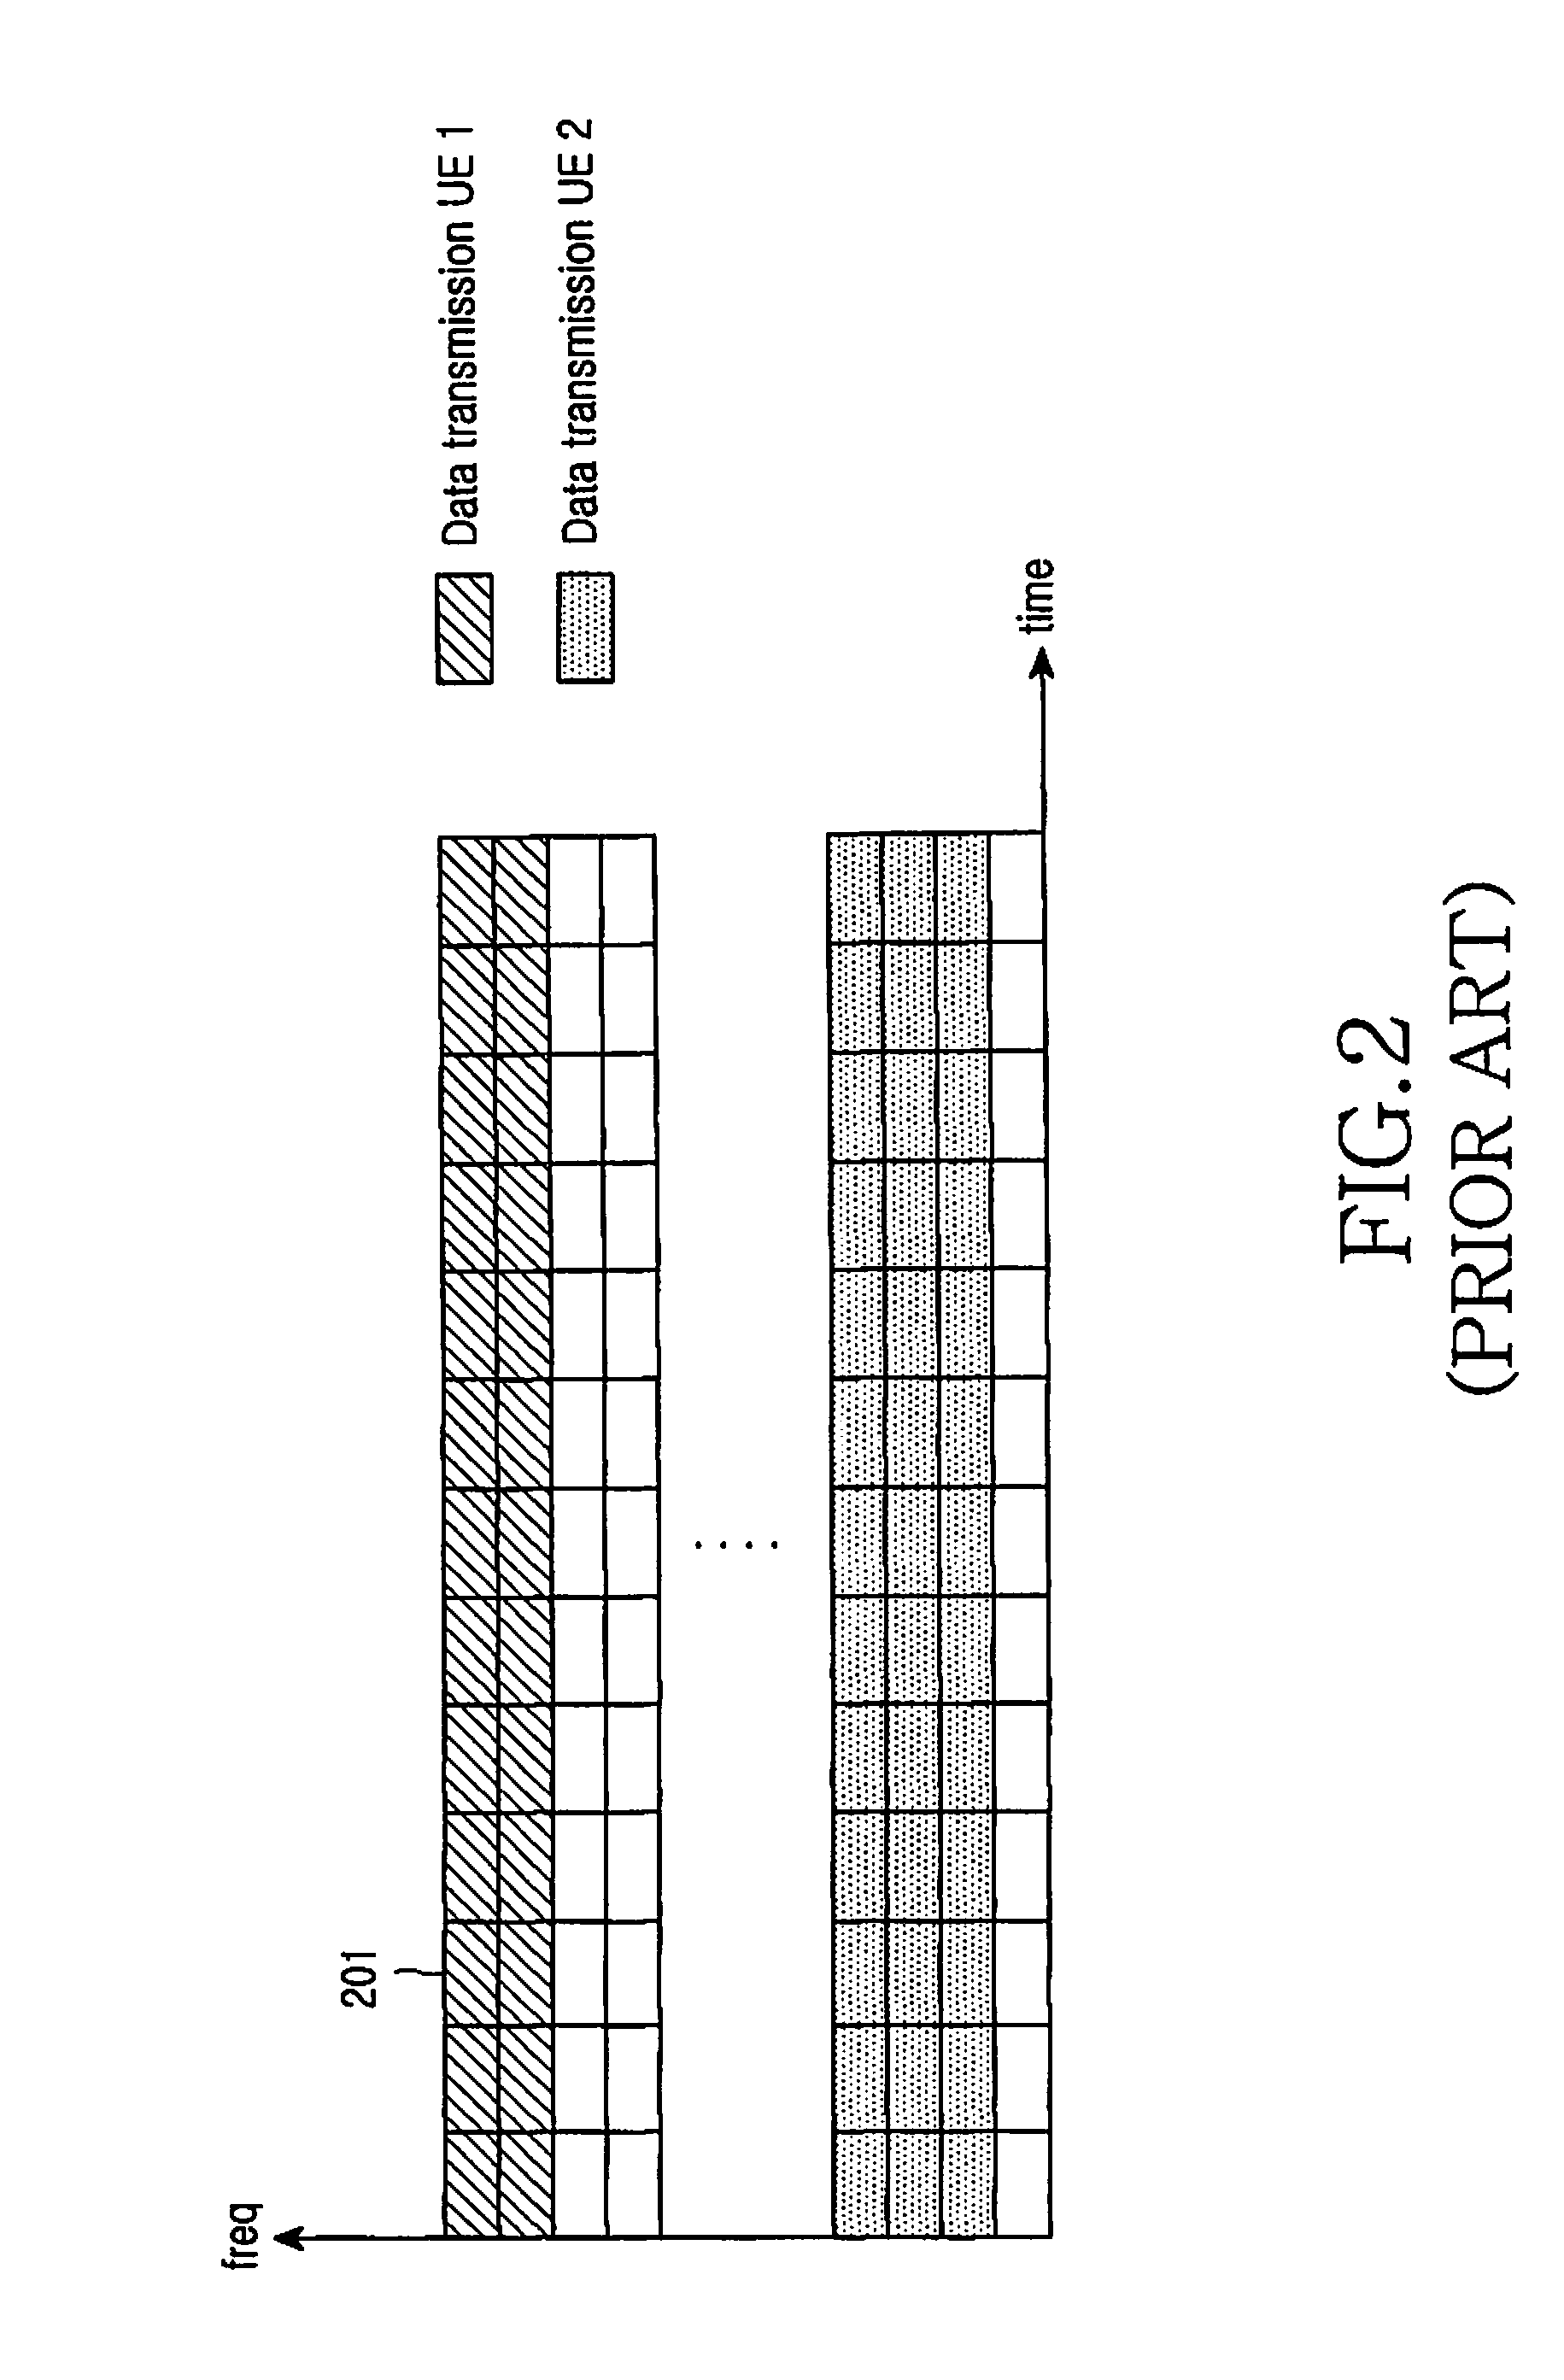 Apparatus and method for allocating resources in a single carrier-frequency division multiple access system